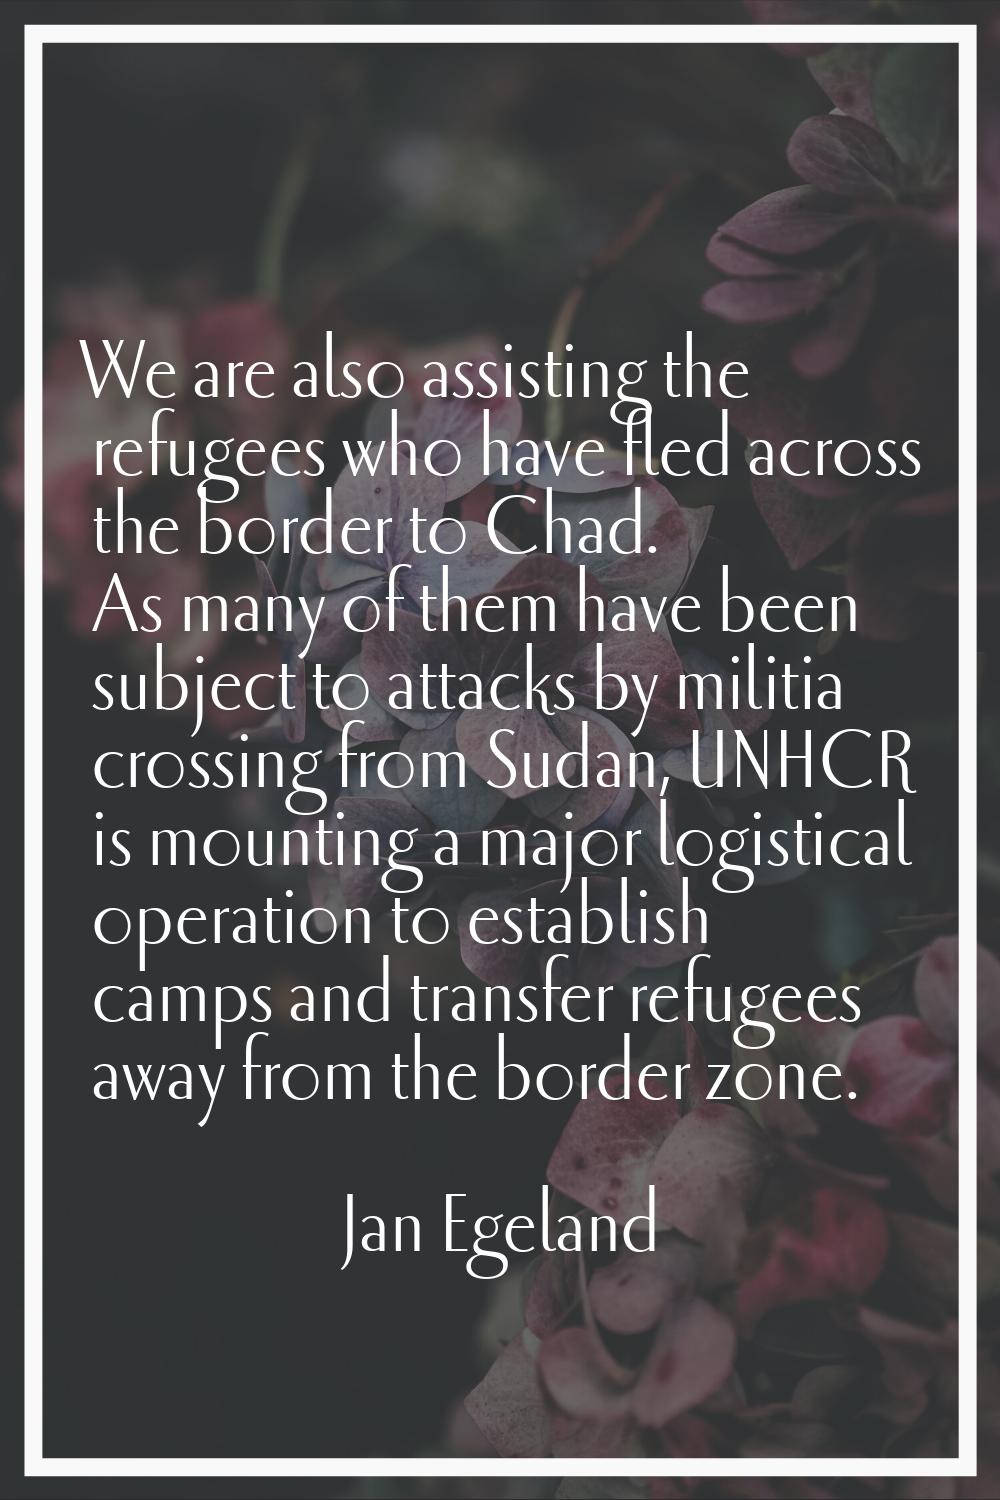 We are also assisting the refugees who have fled across the border to Chad. As many of them have be